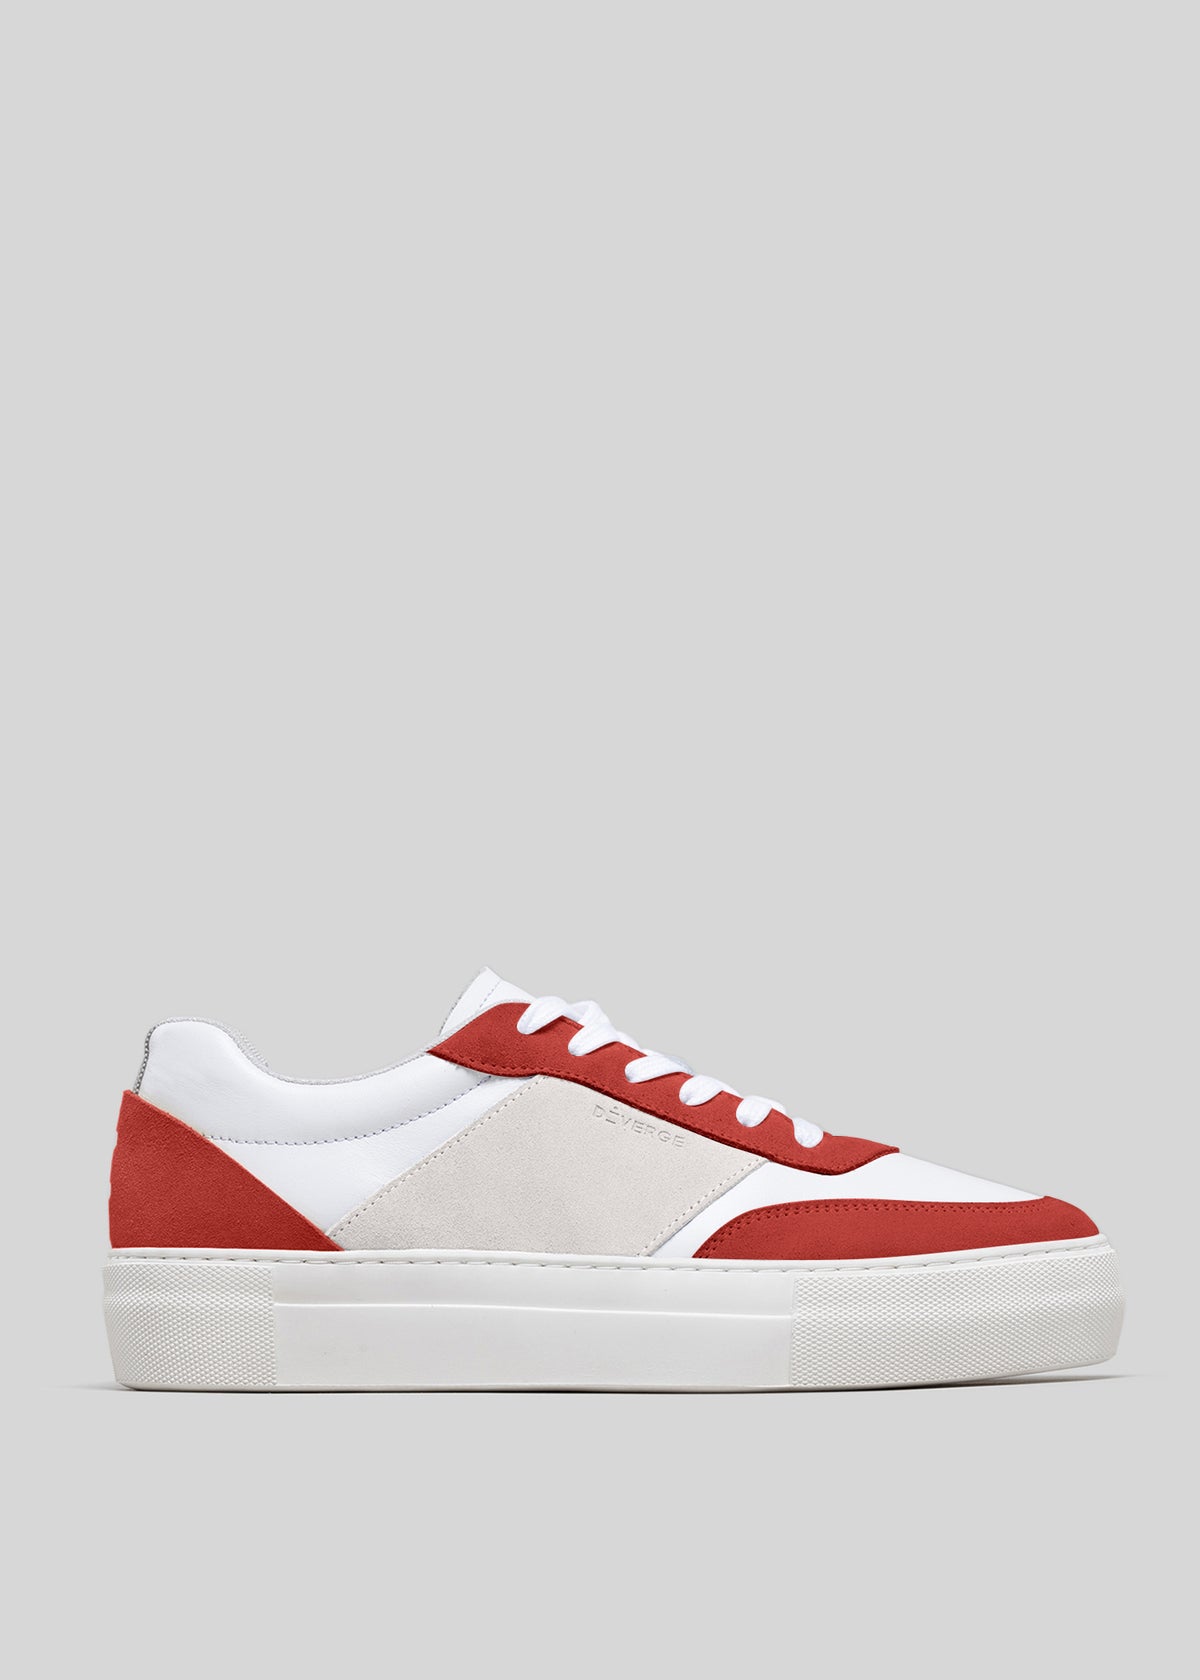 N0001 by Chrys low top sneakers with a thick white sole, displayed against a plain gray background.